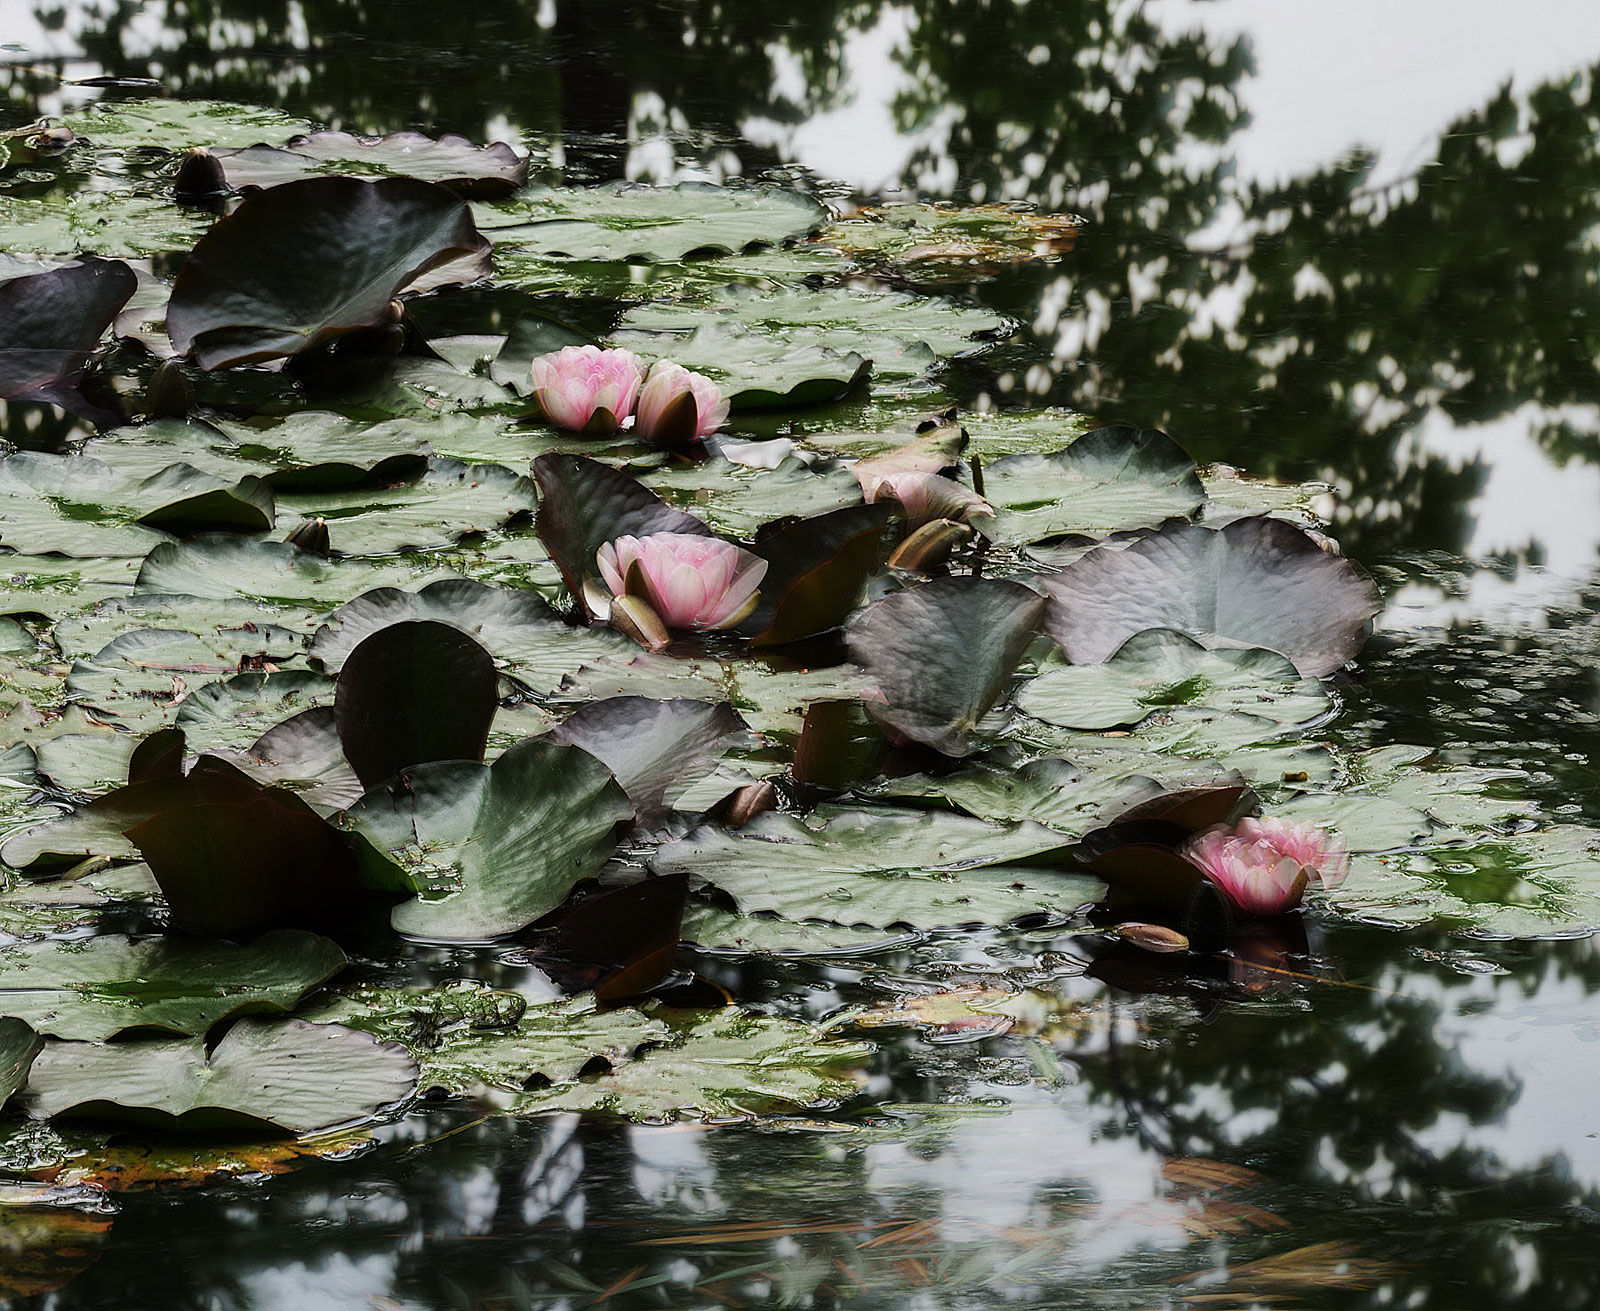 Giverny (18.07 - 19.49 Uhr, 26.6.2014)